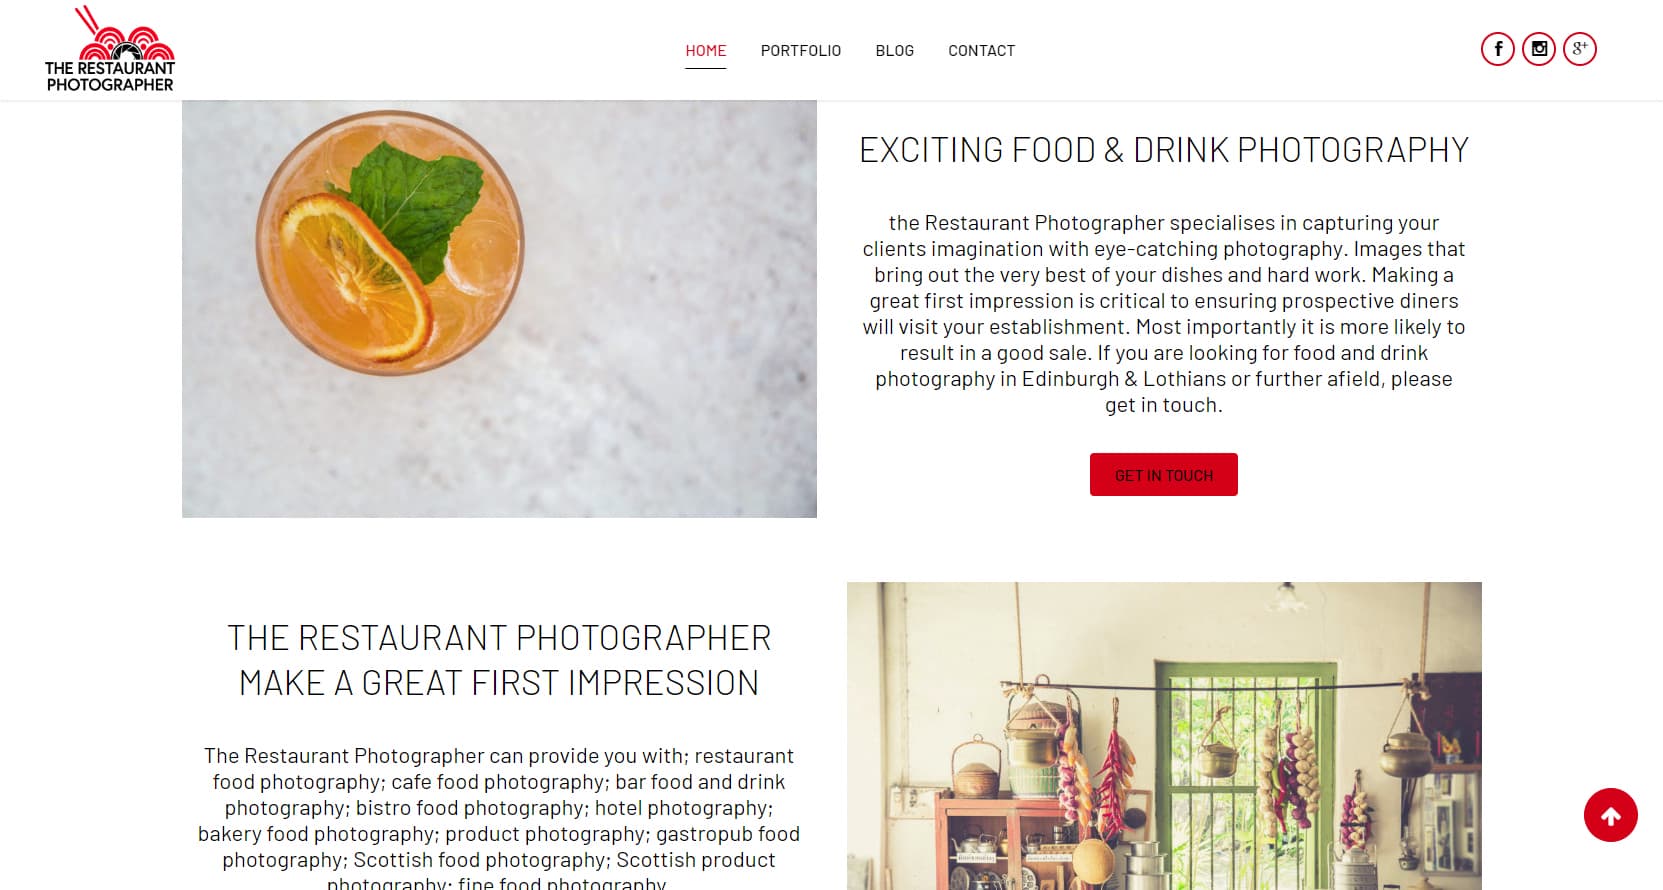 The Restaurant Photographer Make a Great First Impression (1)